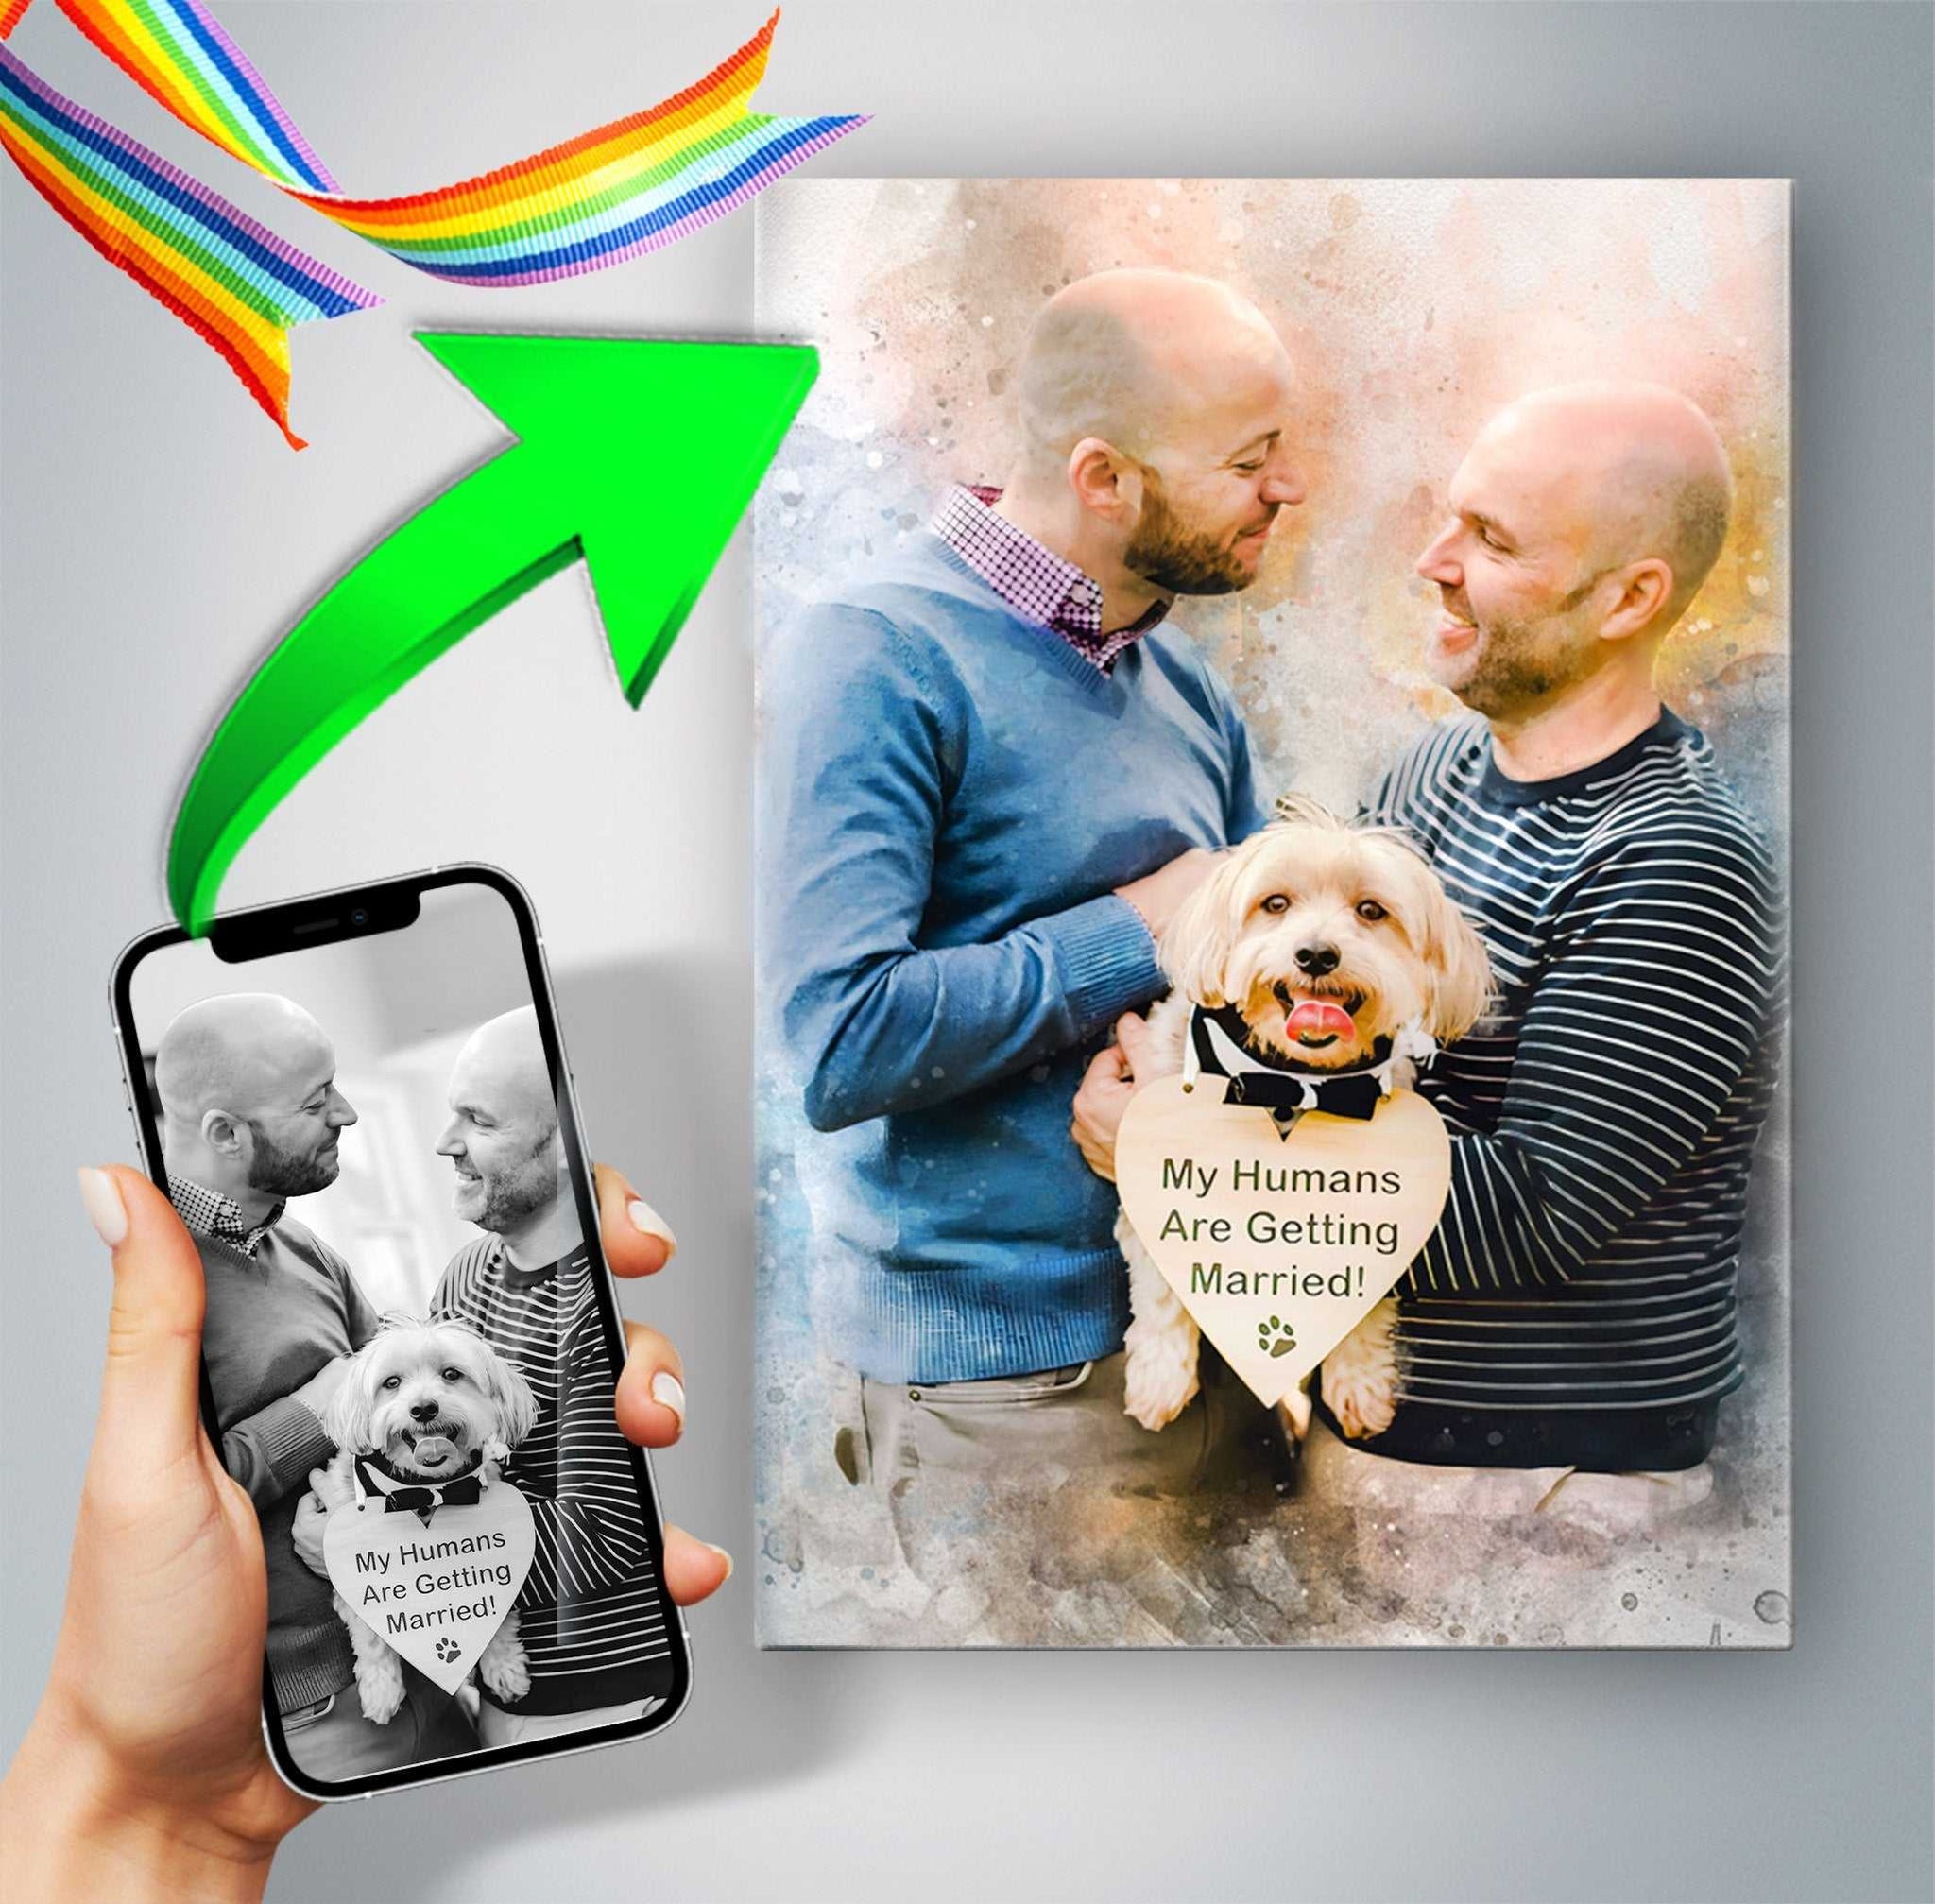 🌈 Gifts for Gay Men - Gifts for LGBTQ Community ♥️ Love is Love - FromPicToArt